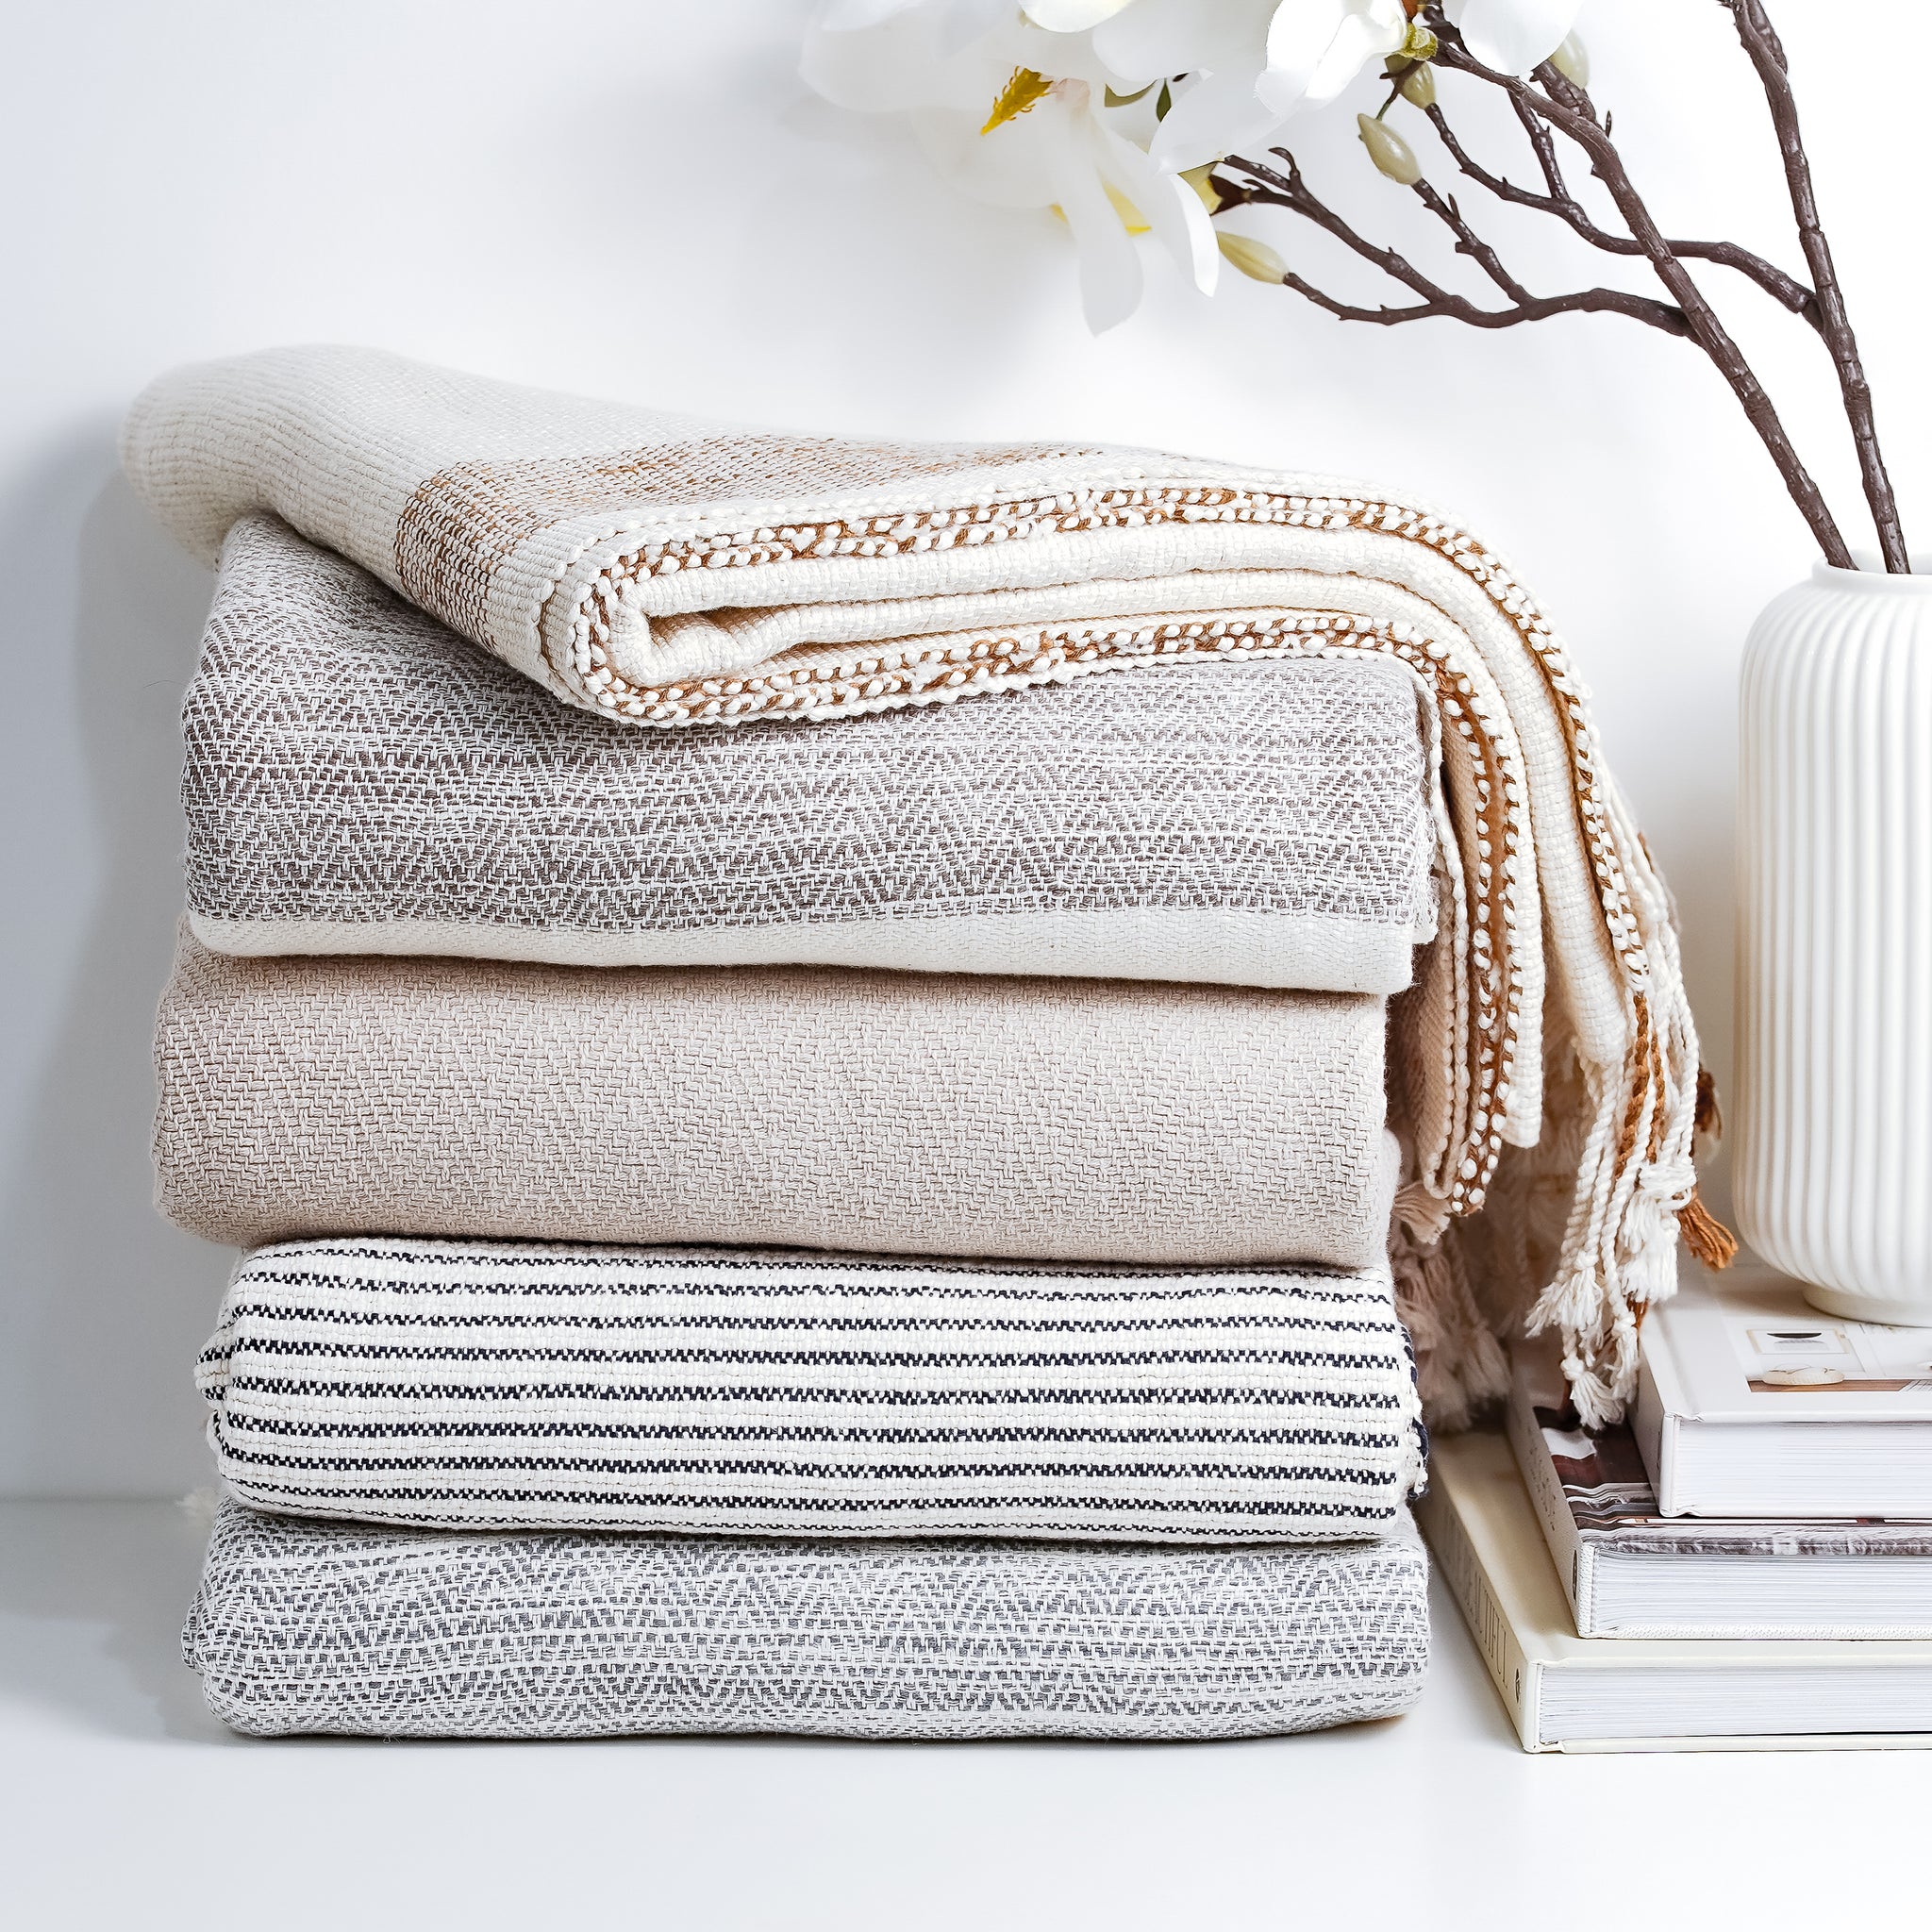 Bring comfort and style to your home with this modern and minimalist throw blanket.   This throw is lightweight and perfect to cozy up with or drape over any sofa back, armchair, or foot of the bed all year long. 